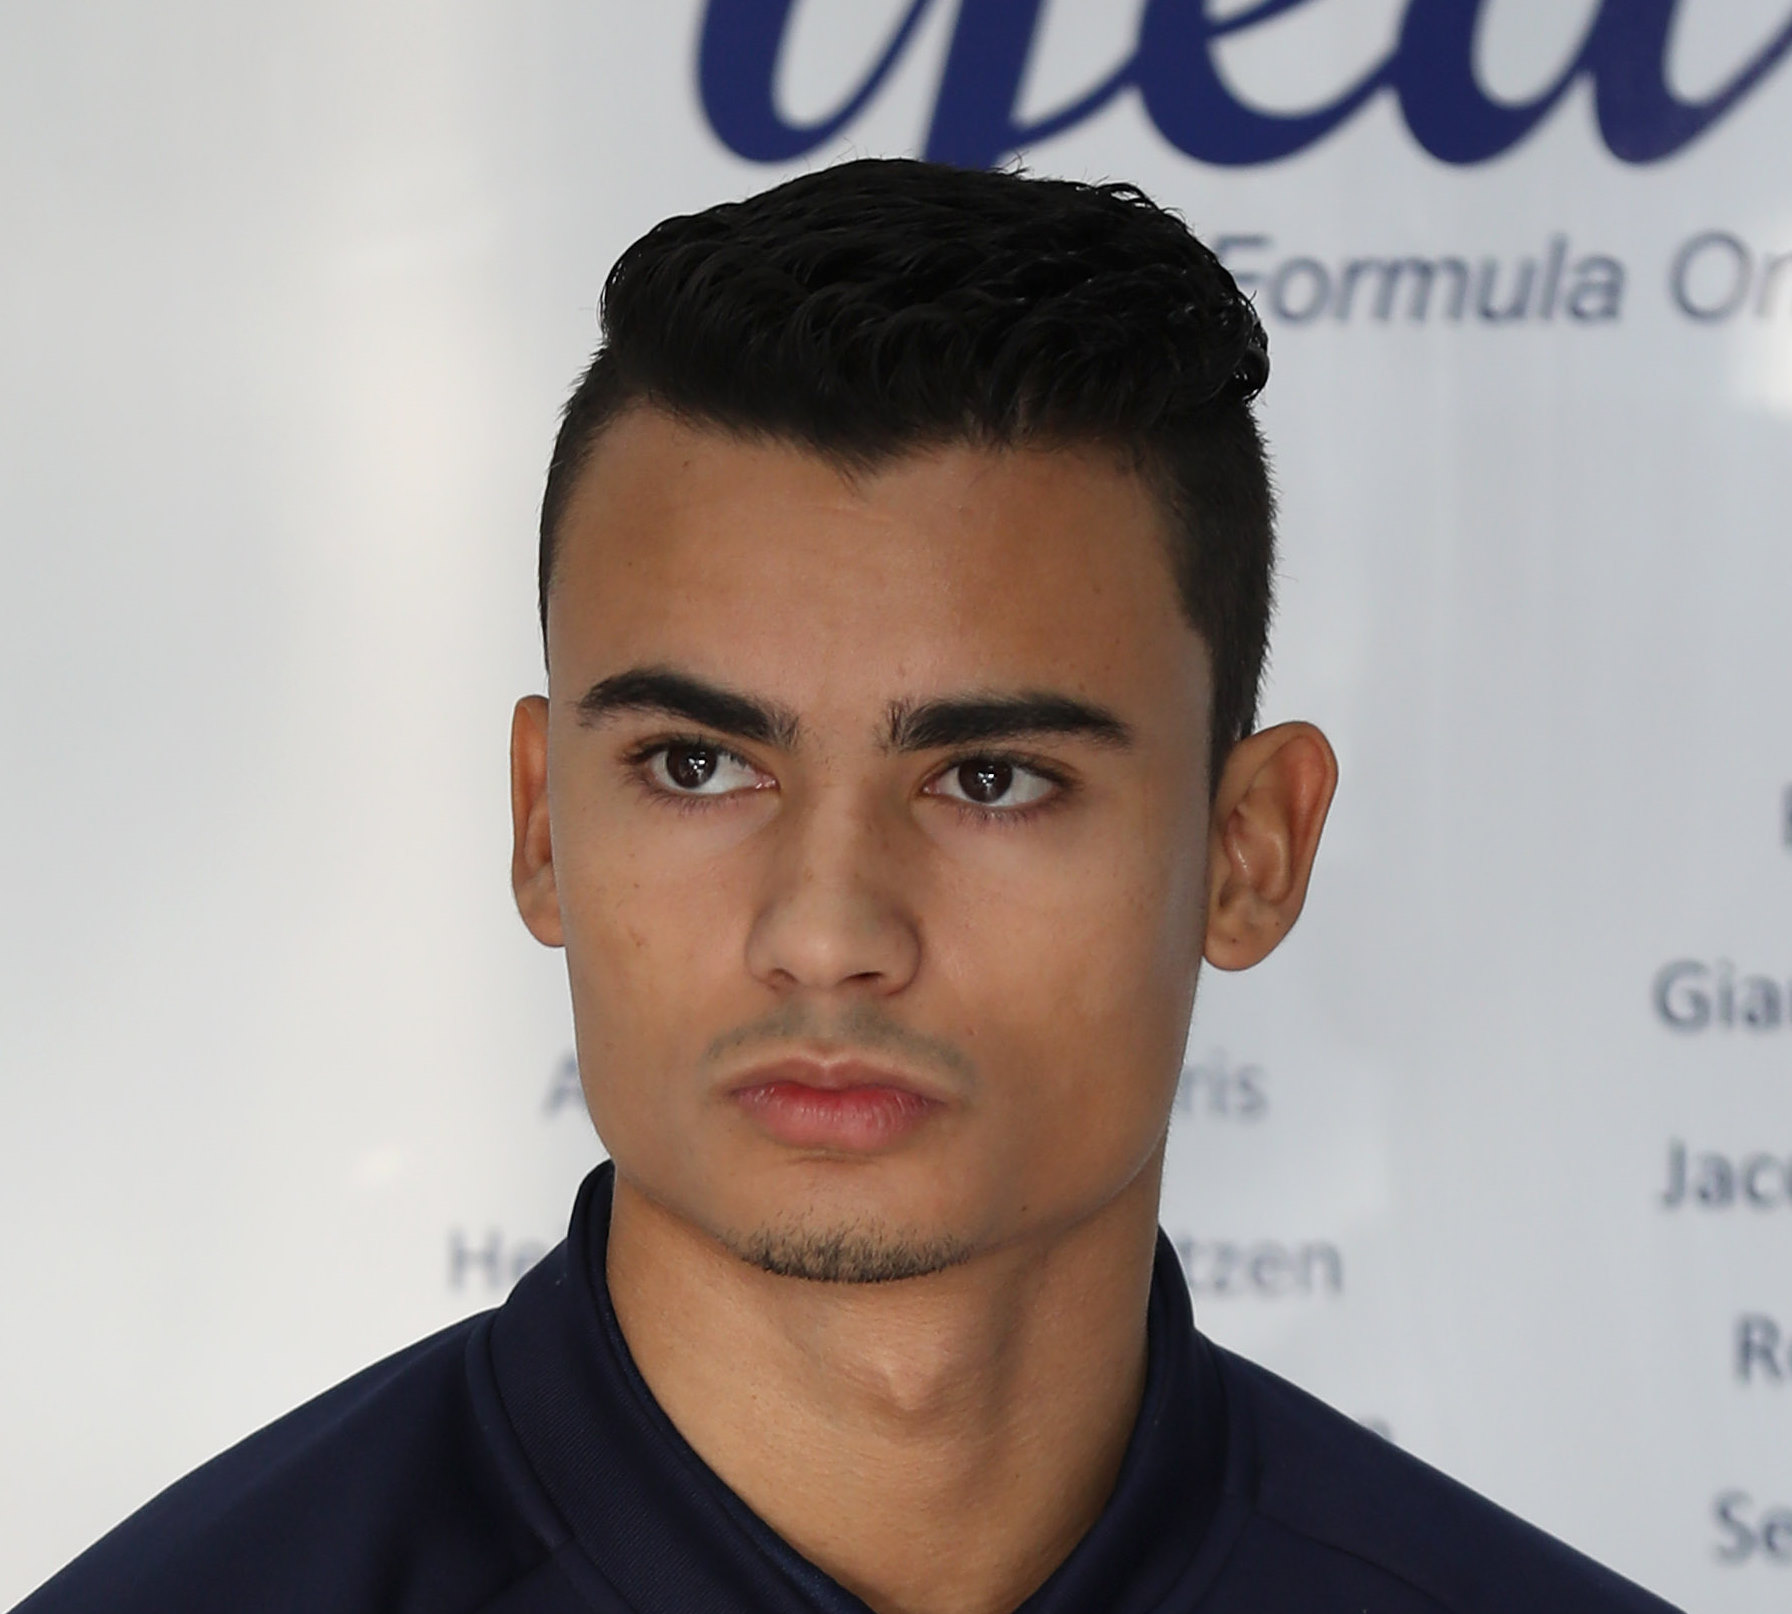 Pascal Wehrlein starring into blank space